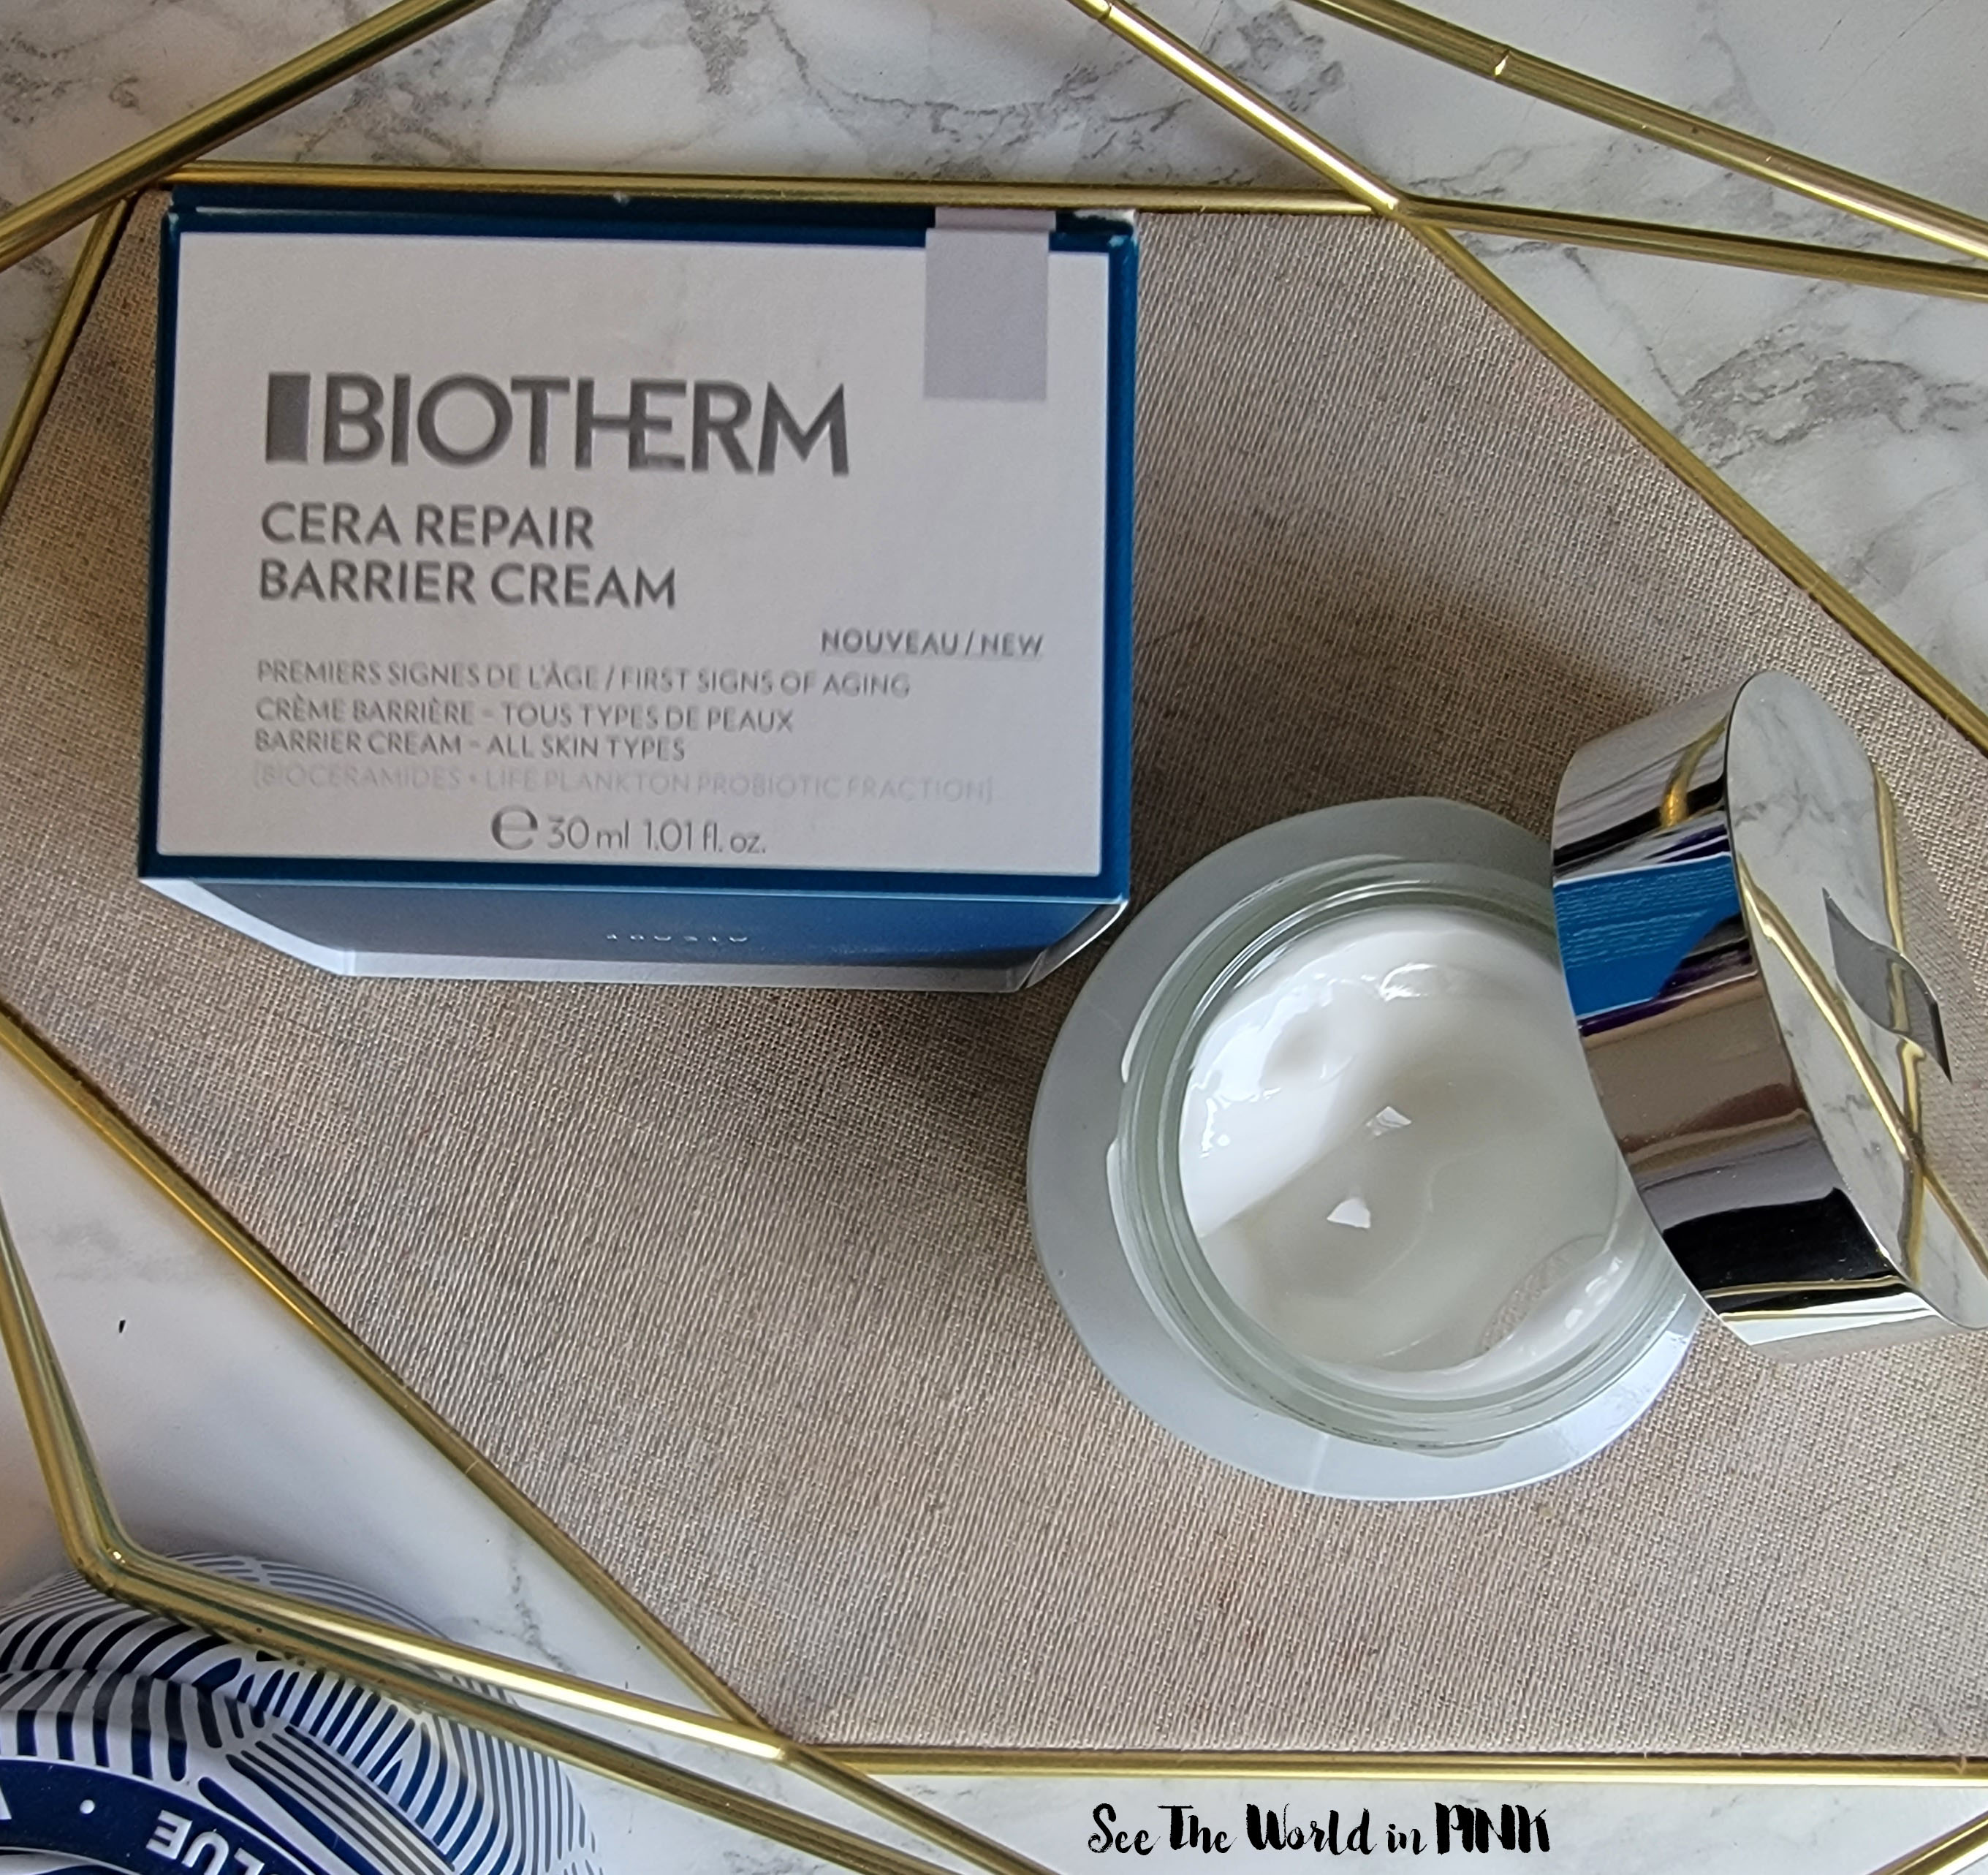 Transitioning to Fall Skincare With Biotherm